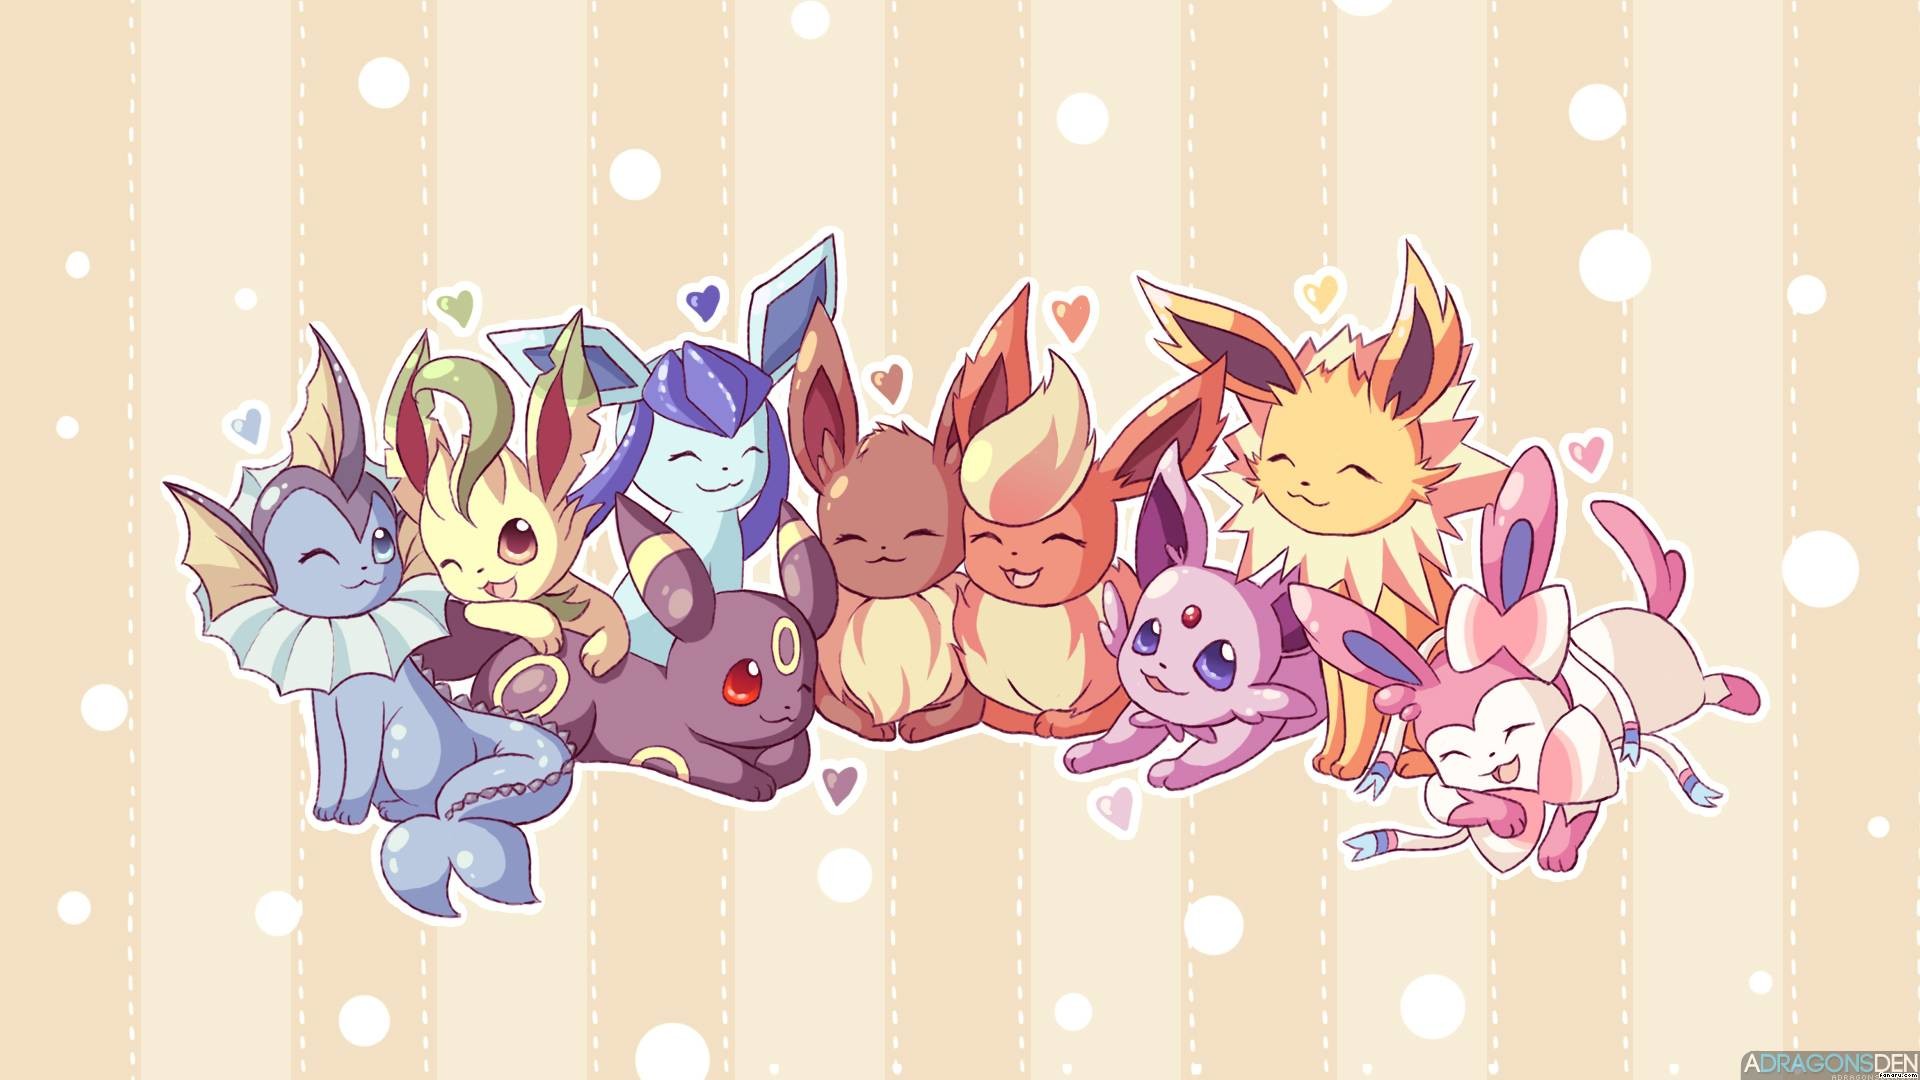 1920x1080 Cutest Pokemon images Cute Pokemon Wallpaper HD wallpaper and background  photos